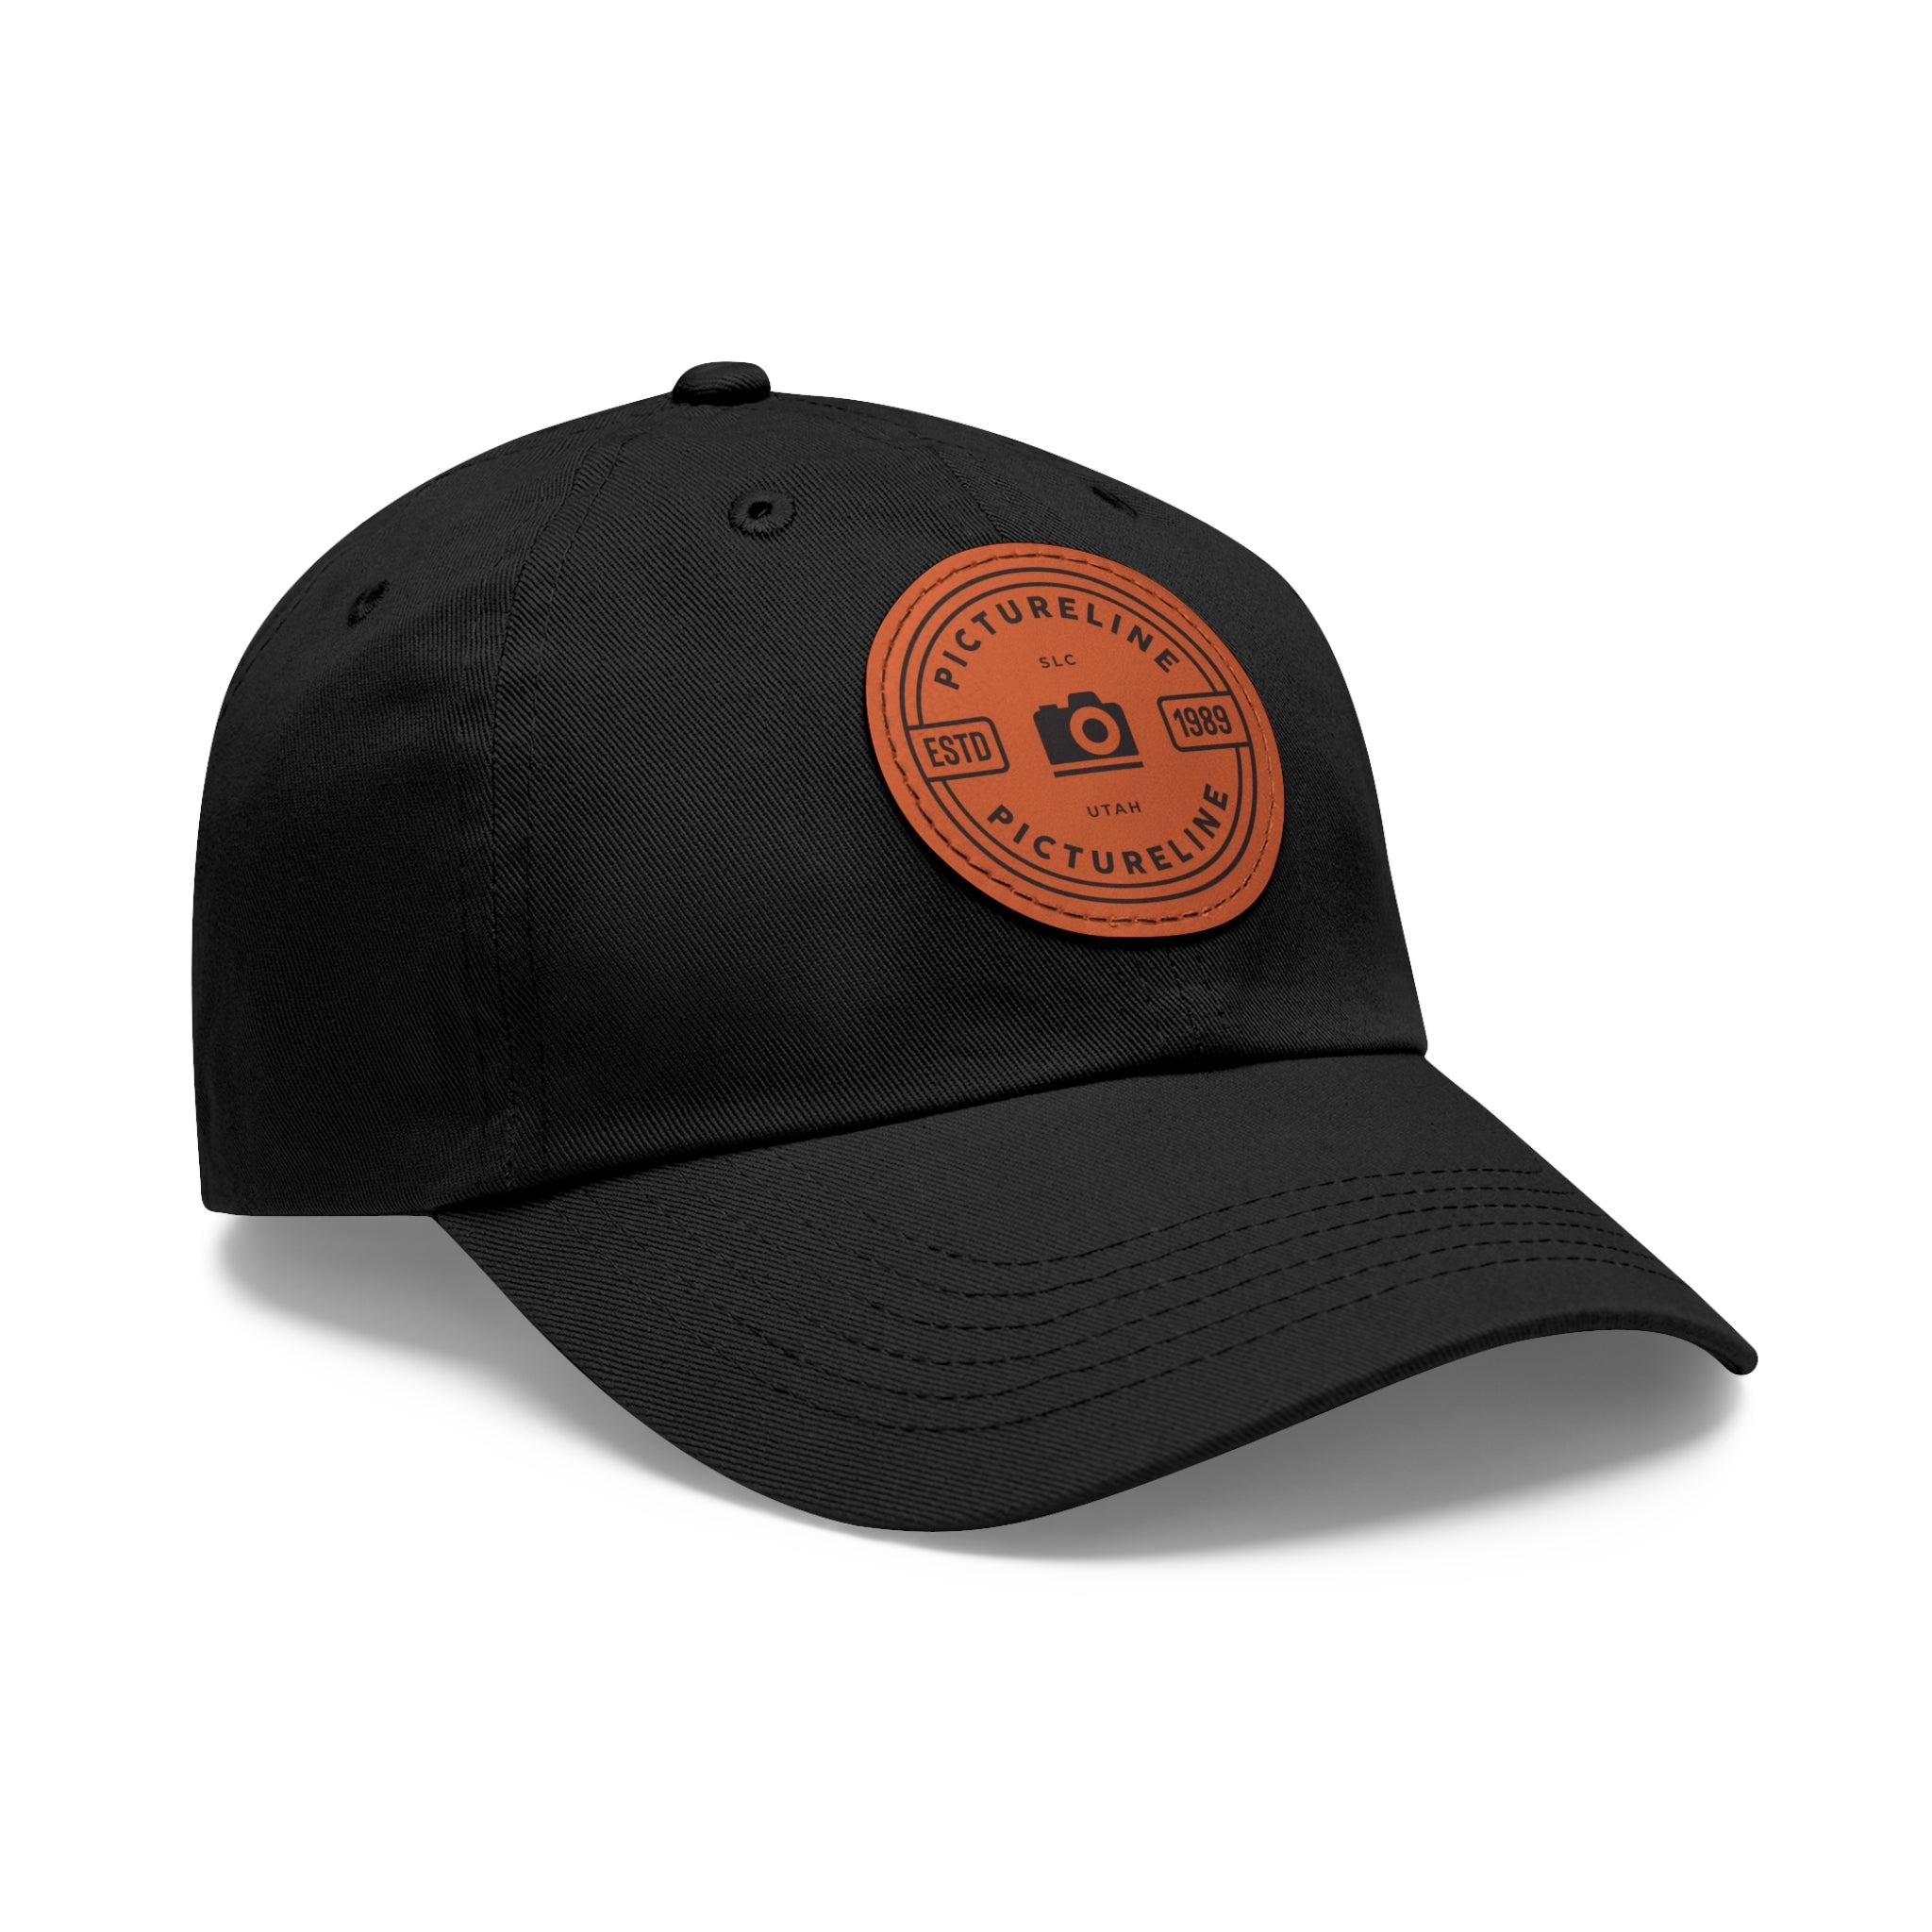 Pictureline Hat with Leather Patch